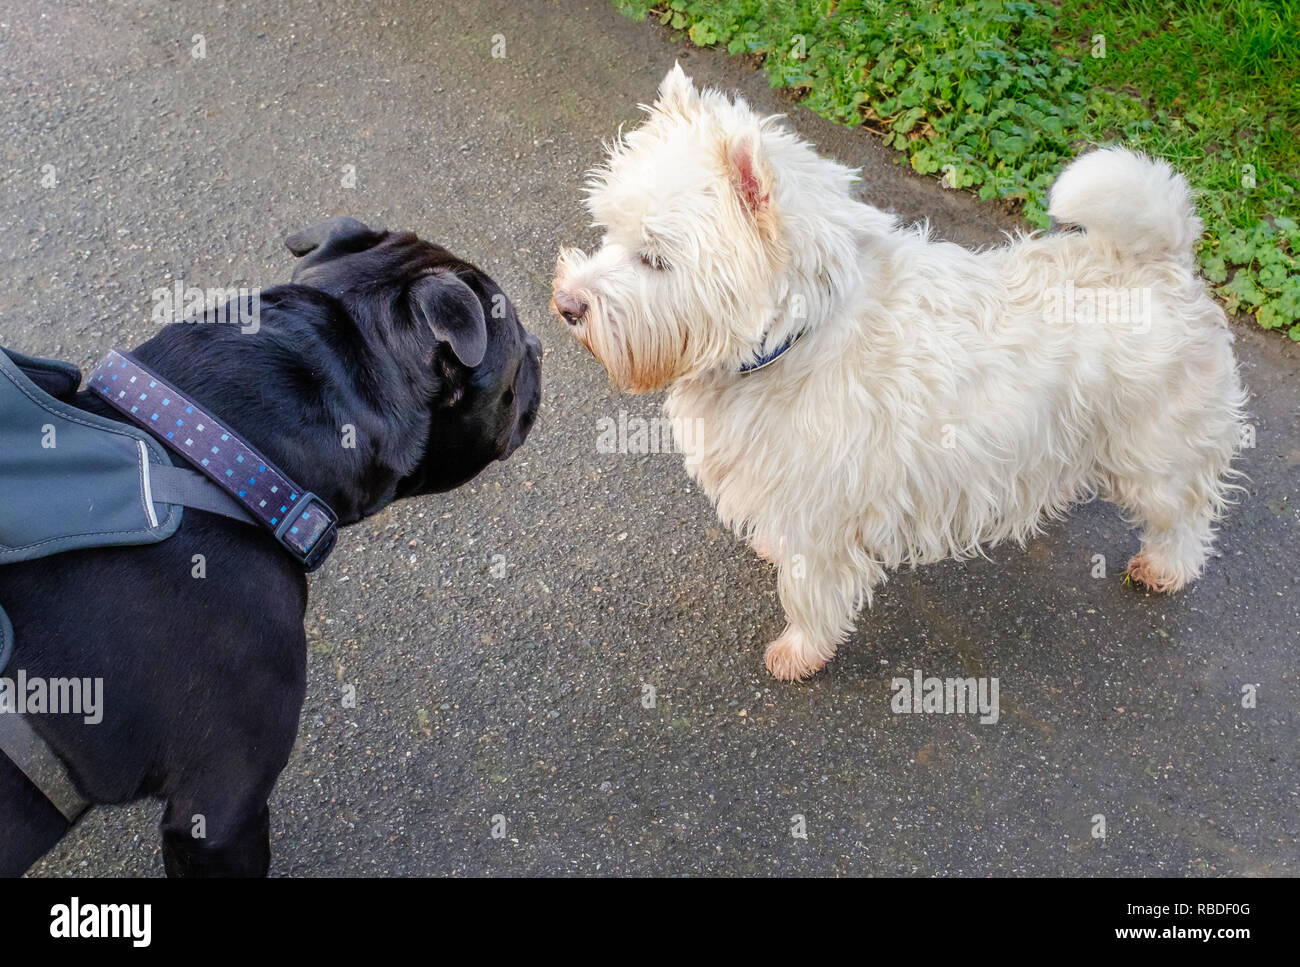 A black Staffordshire bull terrier dog meets a West Highland White Terrier . The Staffie dog is wearing a harness. The Westie has no lead. They are al Stock Photo